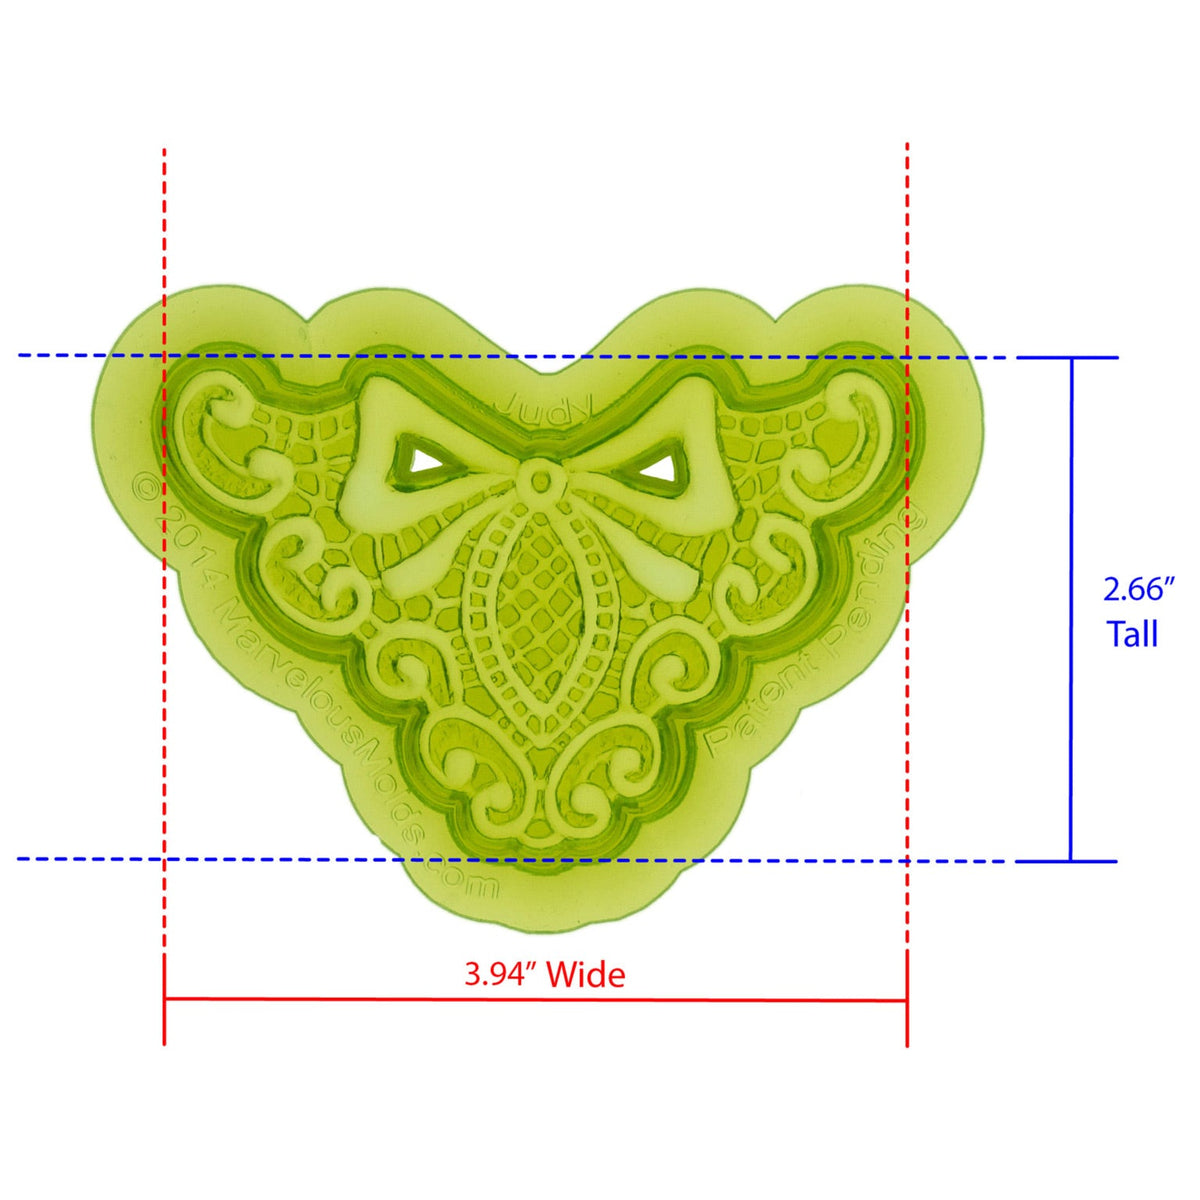 Judy Lace Silicone Mold Cavity measures 3.94 inches Wide by 2.66 inches Tall, proudly Made in USA